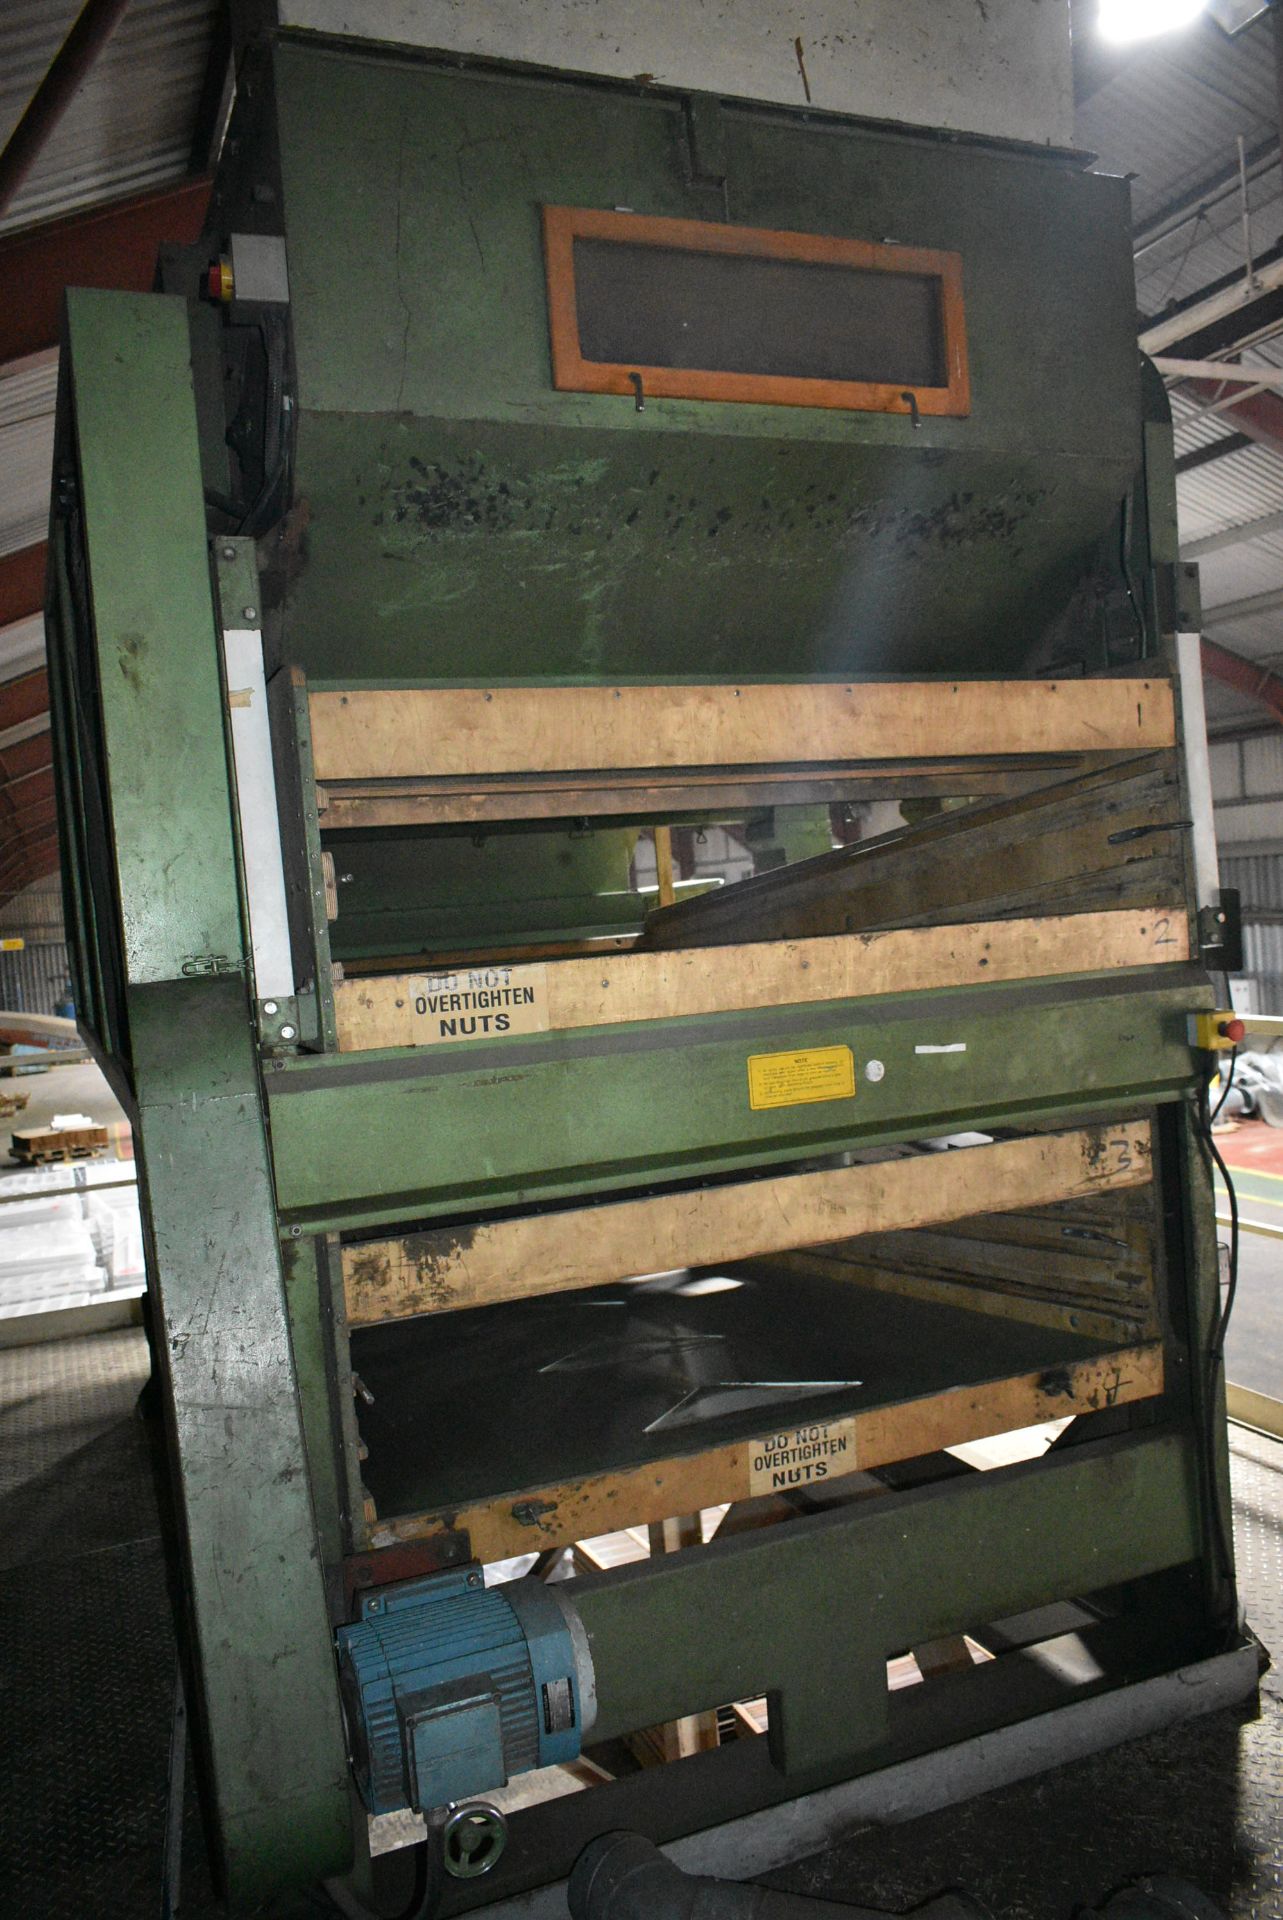 Westrup FA.1500 SEED CLEANER, serial no. 79137, wi